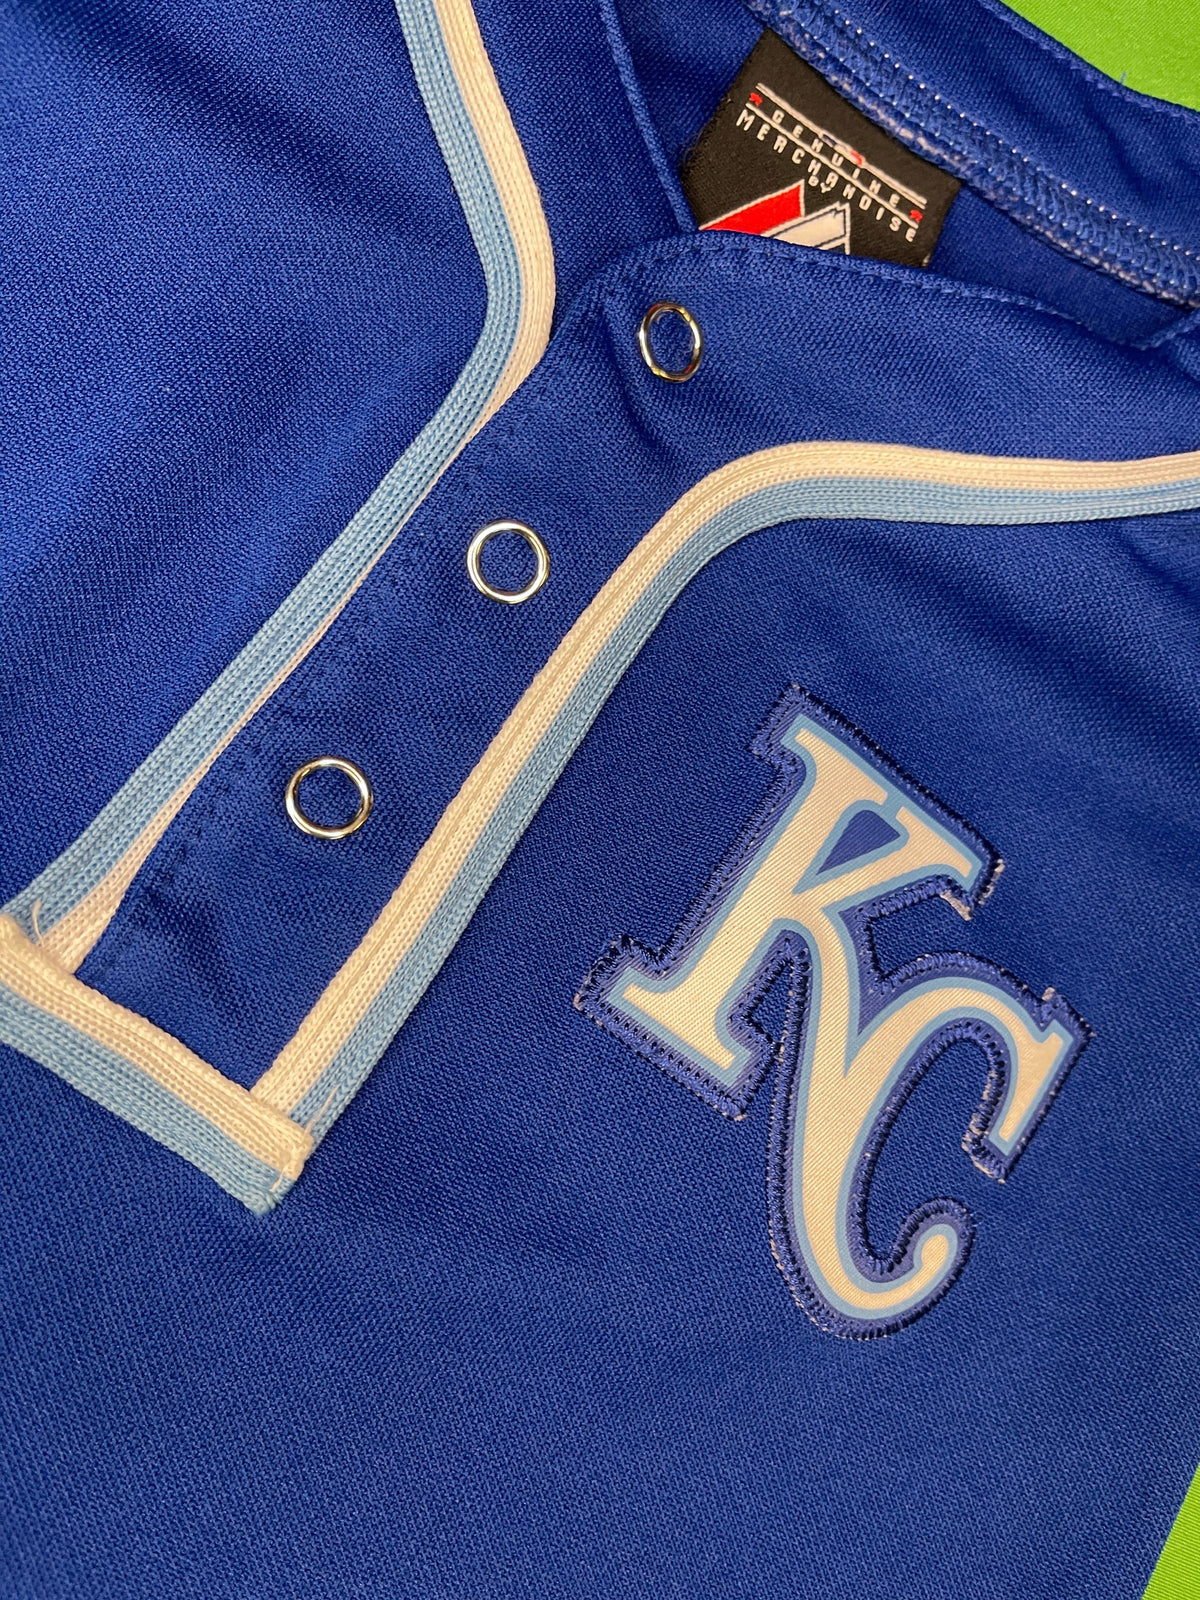 MLB Kansas City Royals Majestic 1-pc Infant Baby Play Outfit Toddler 18 Months